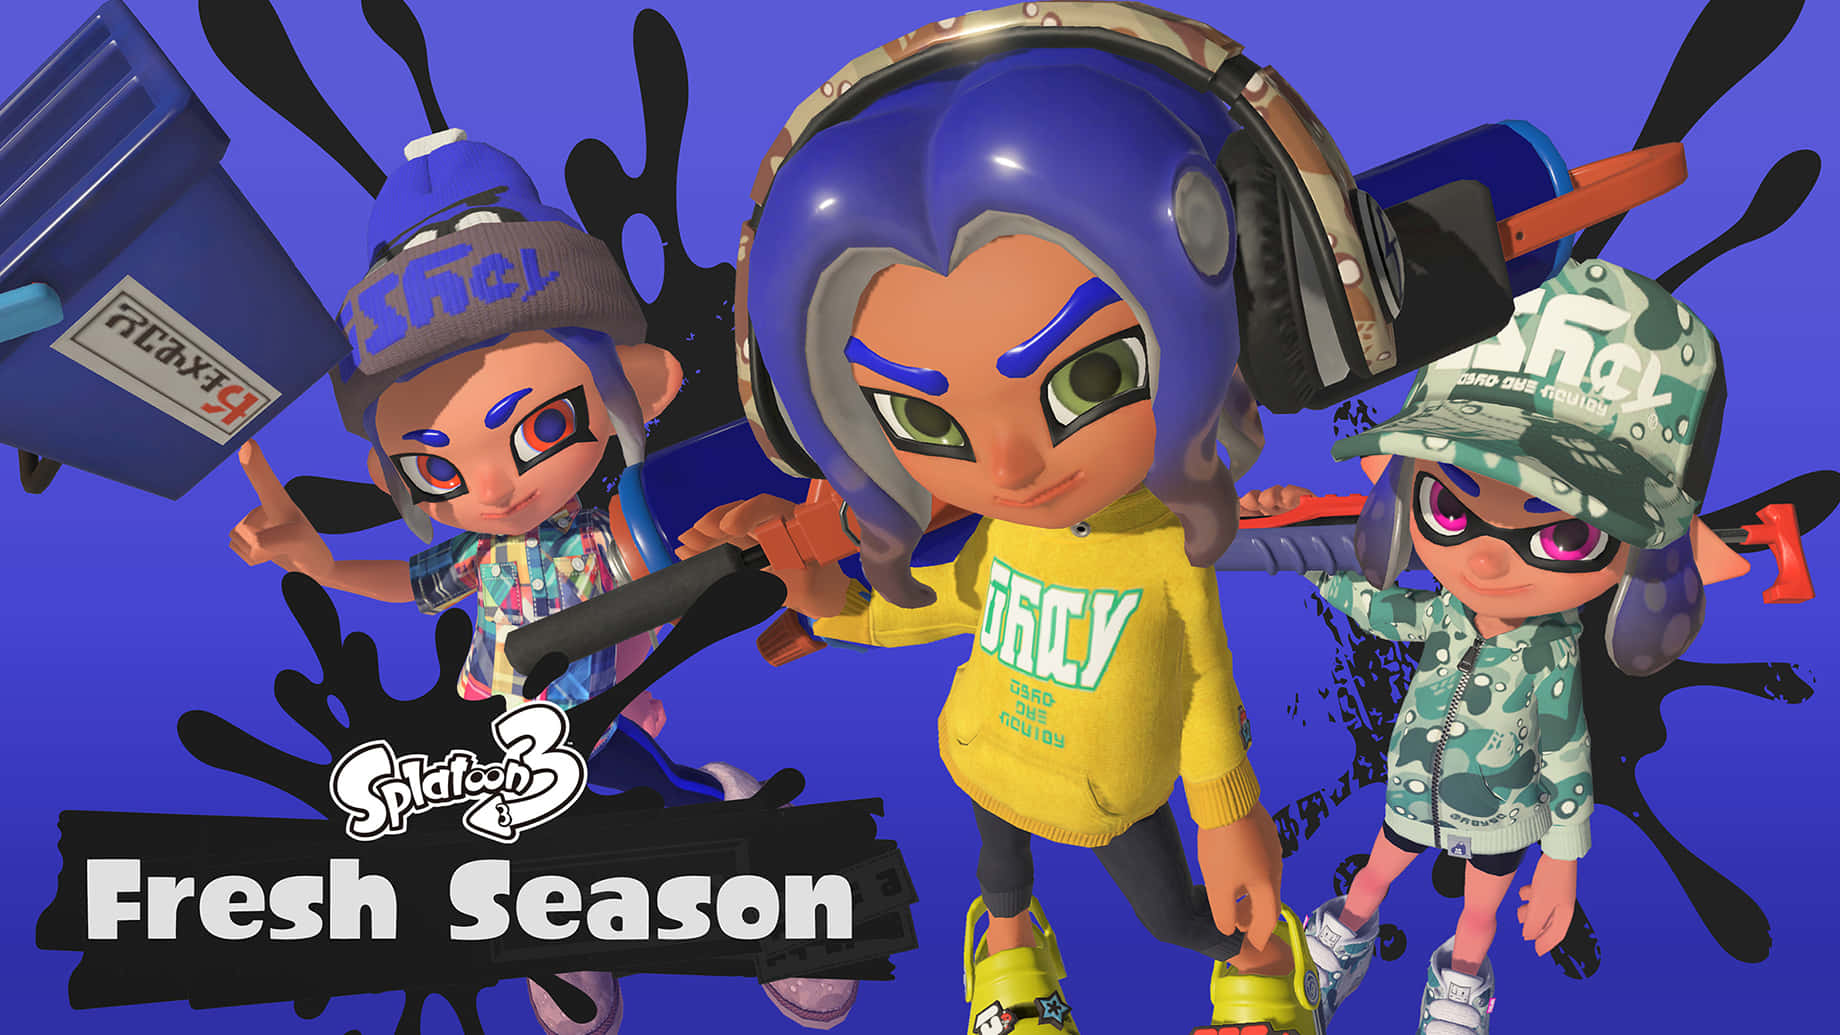 Bright and Colorful Fun with the Splatoon Franchise